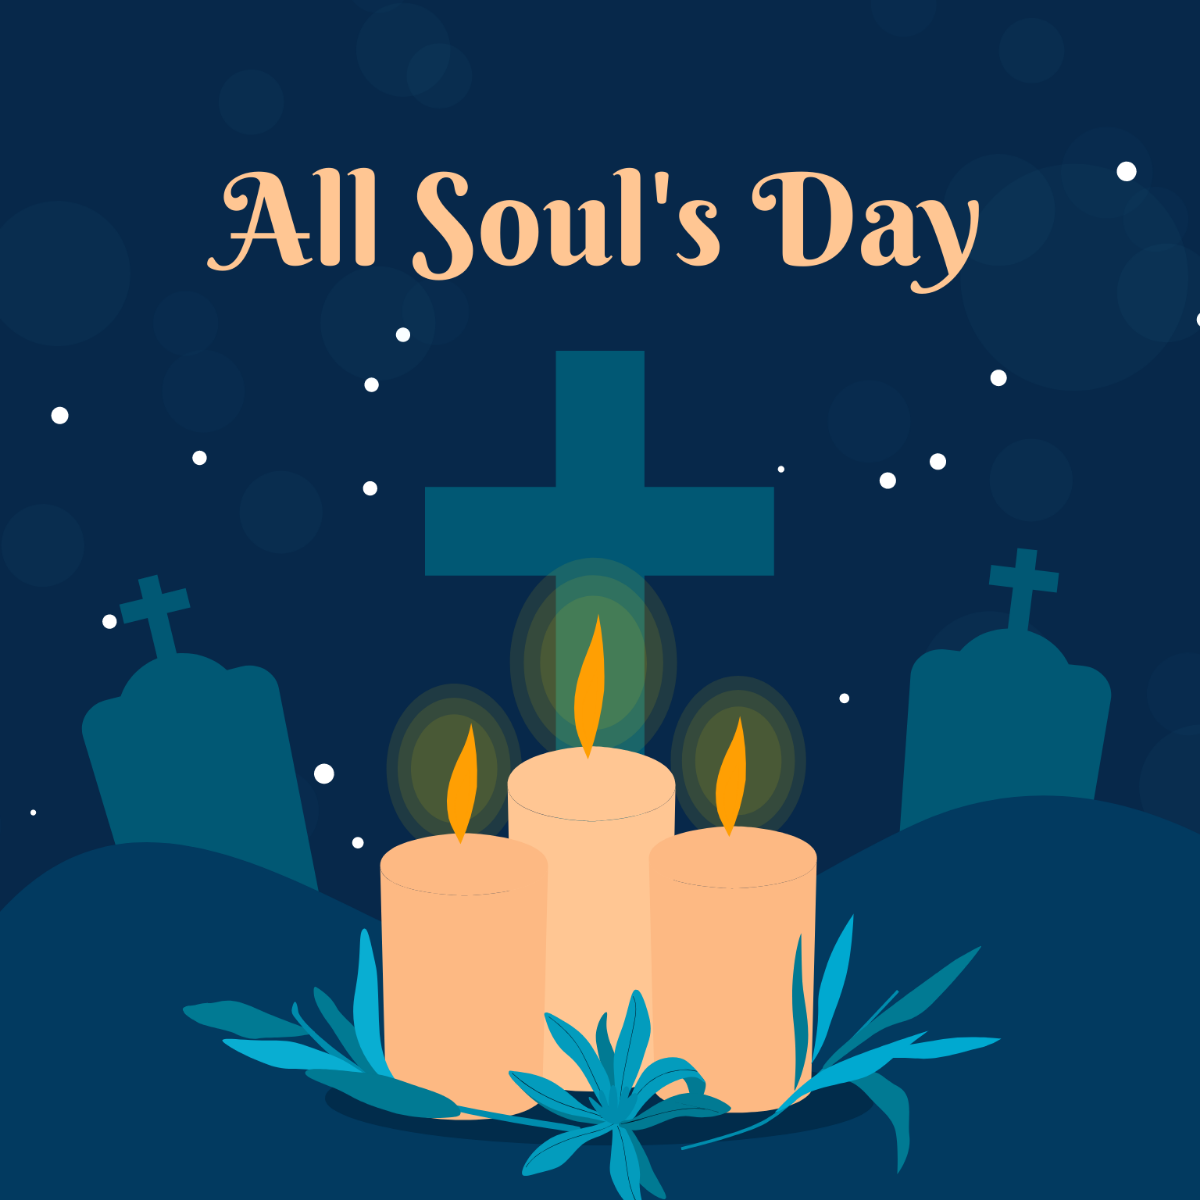 Free Happy All Souls' Day Illustration Template